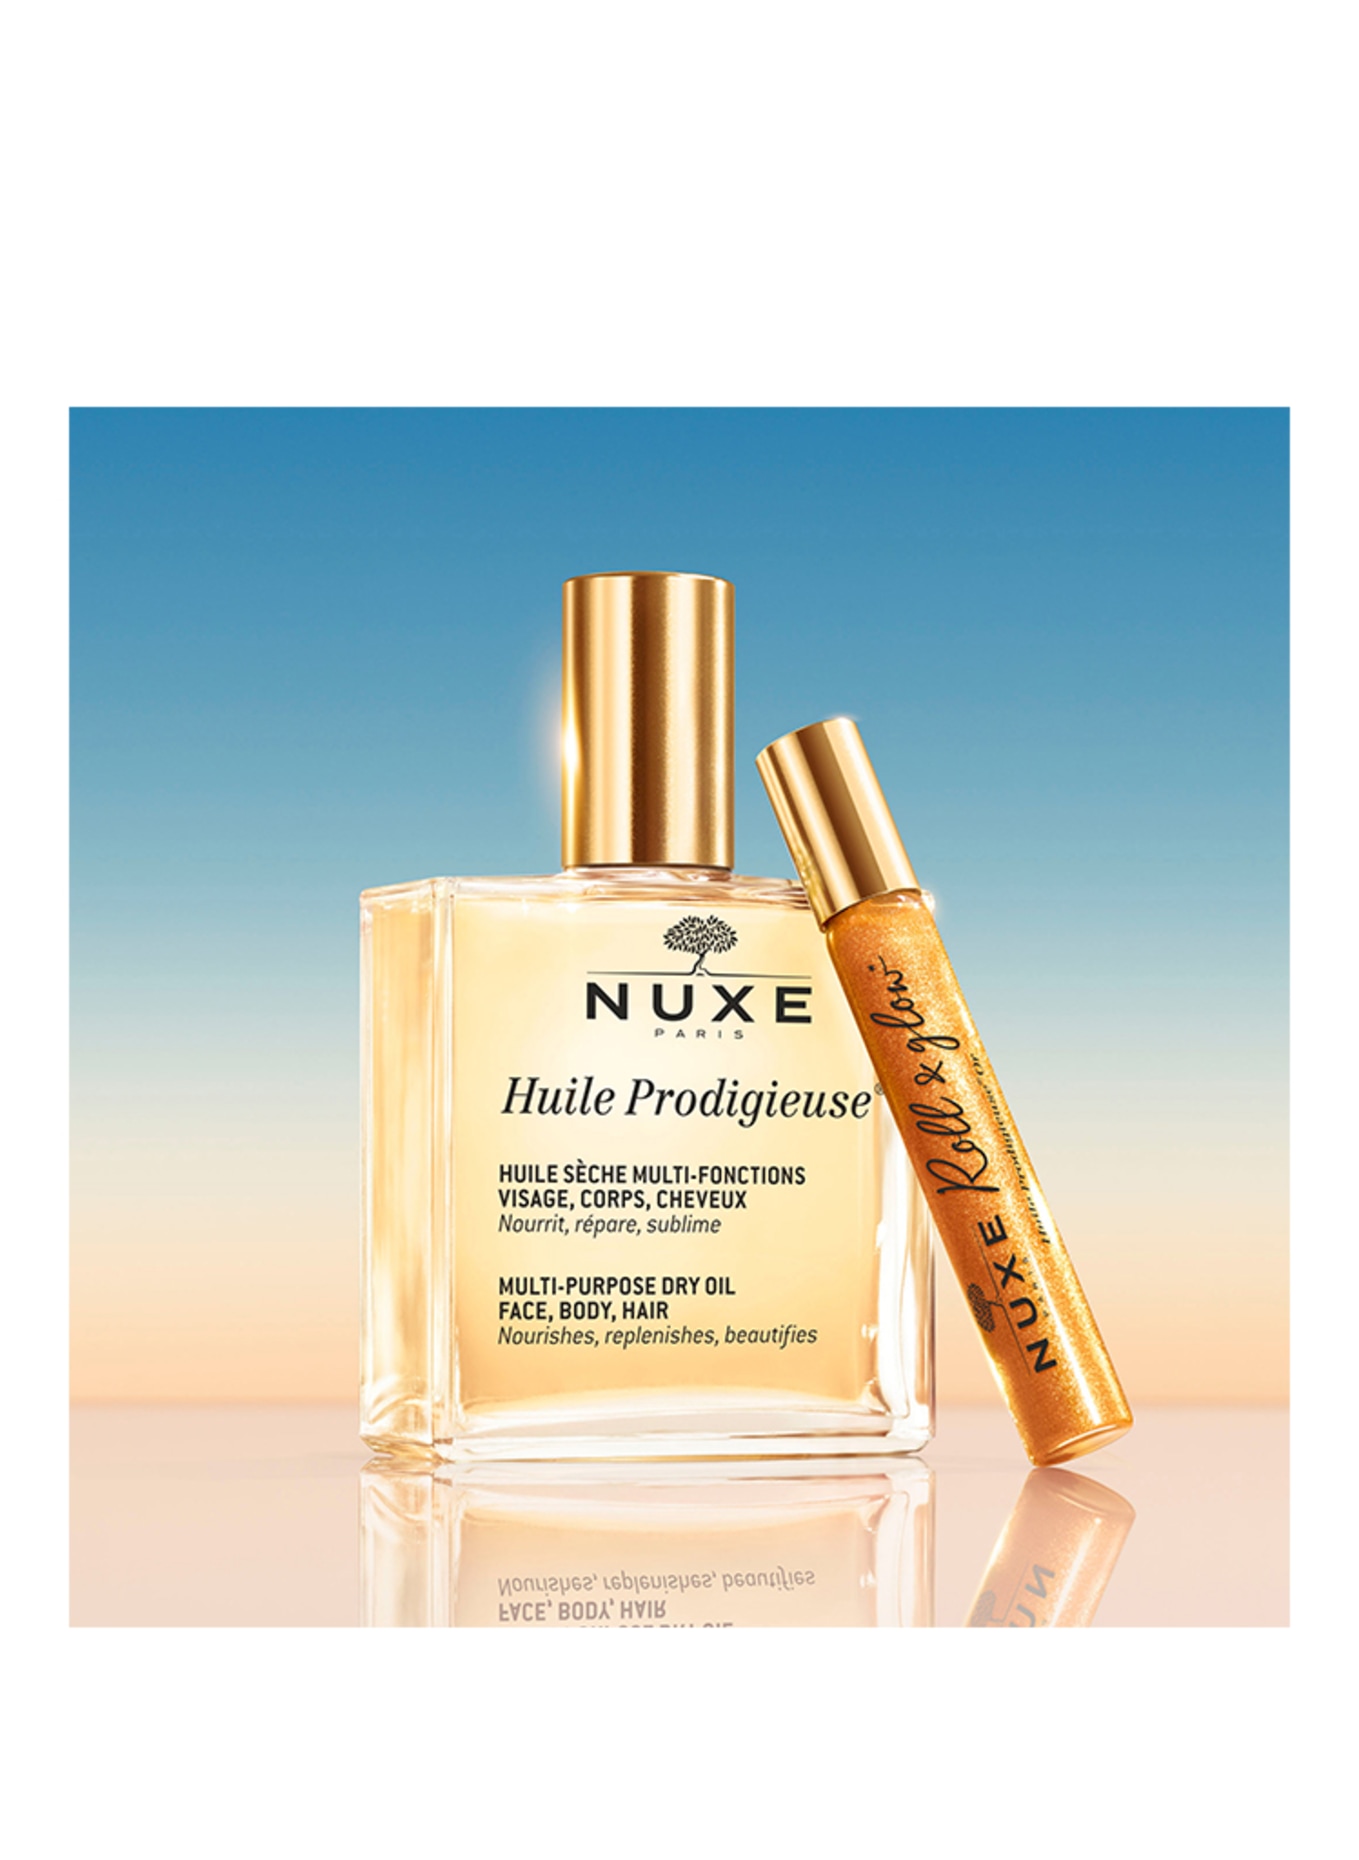 ON OR HUILE + CLASSIC PRODIGIEUSE NUXE ROLL